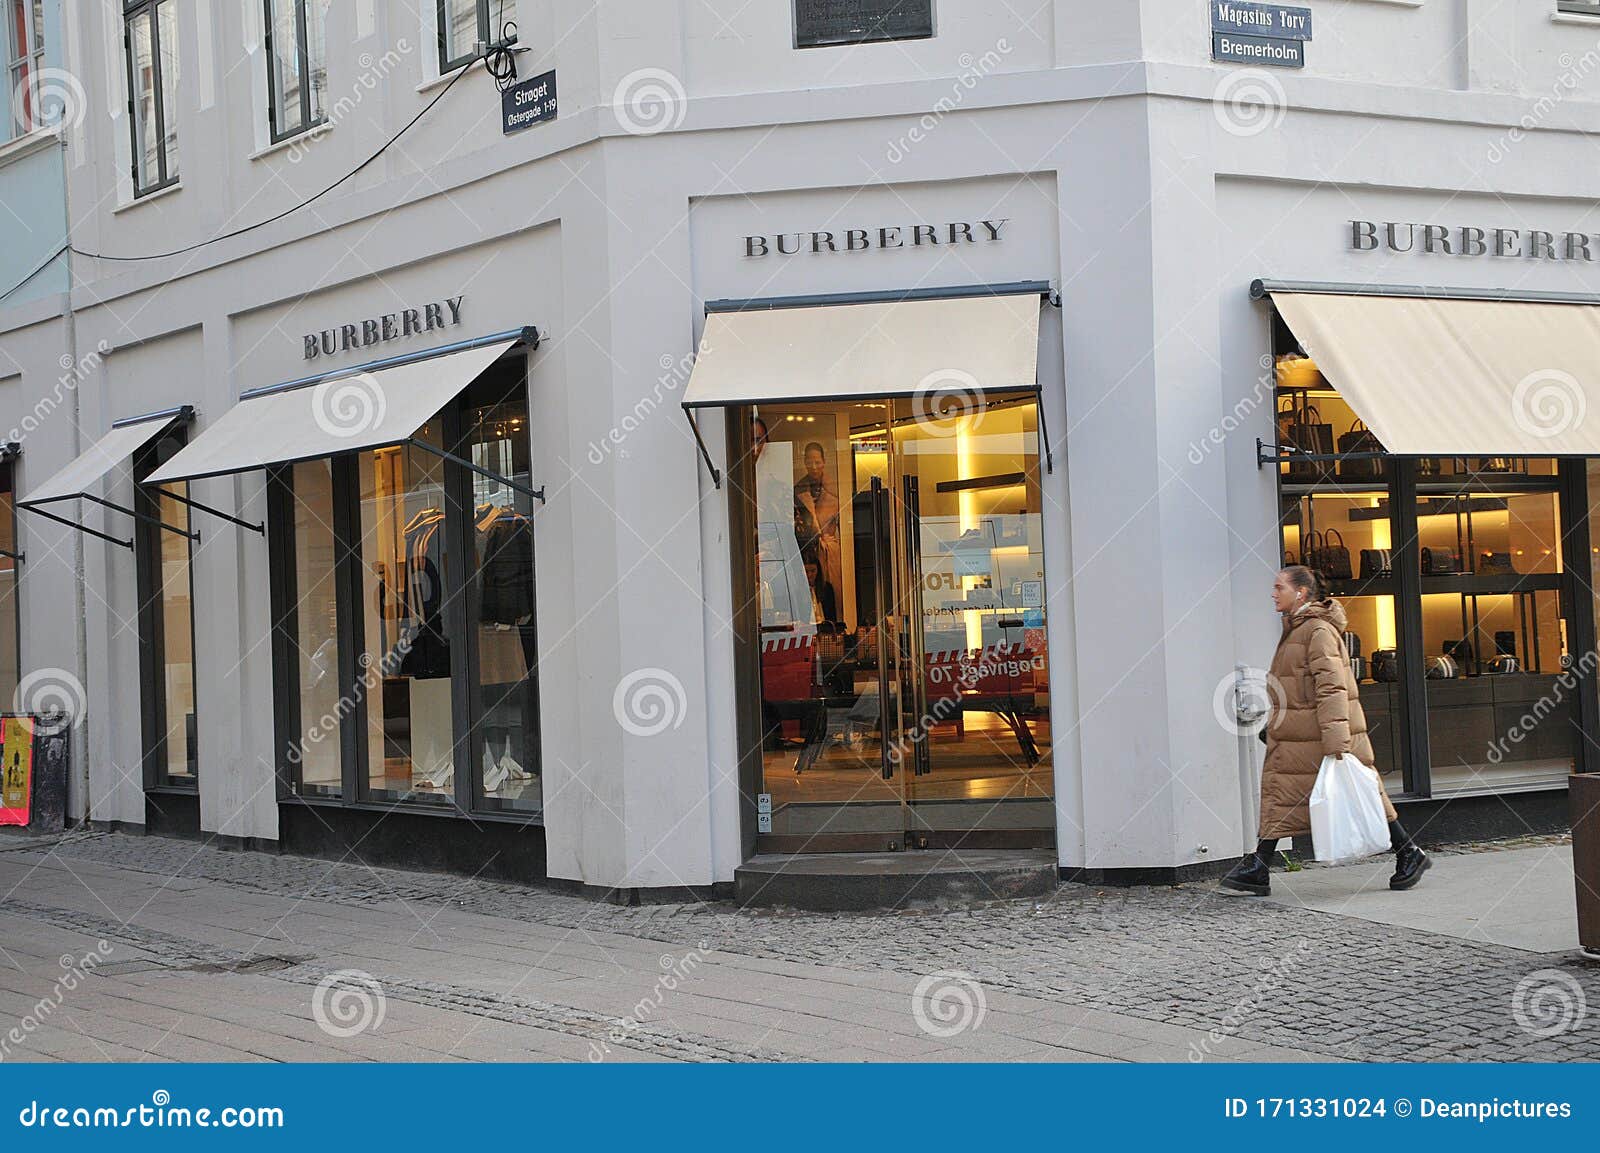 SHOPPER PAS by BURBERRY STORE in COPENHAGEN Editorial Stock Image - of burberry, 171331024